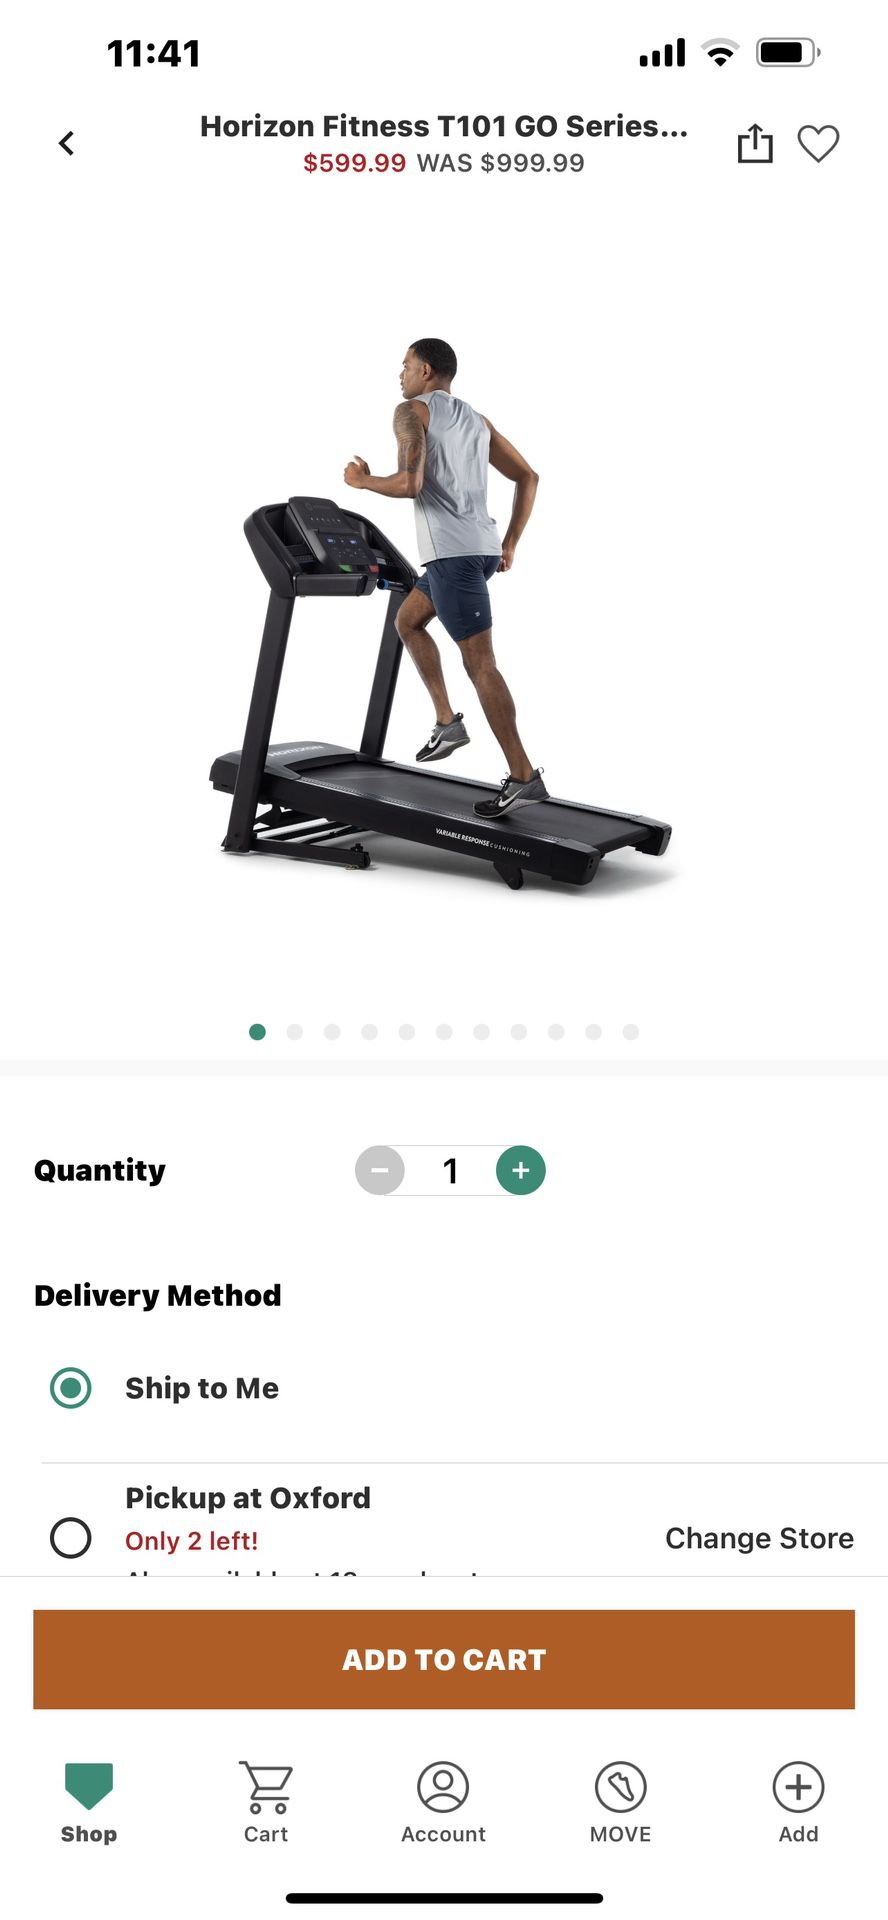 Brand New In The Box Treadmill (not Assembled) 